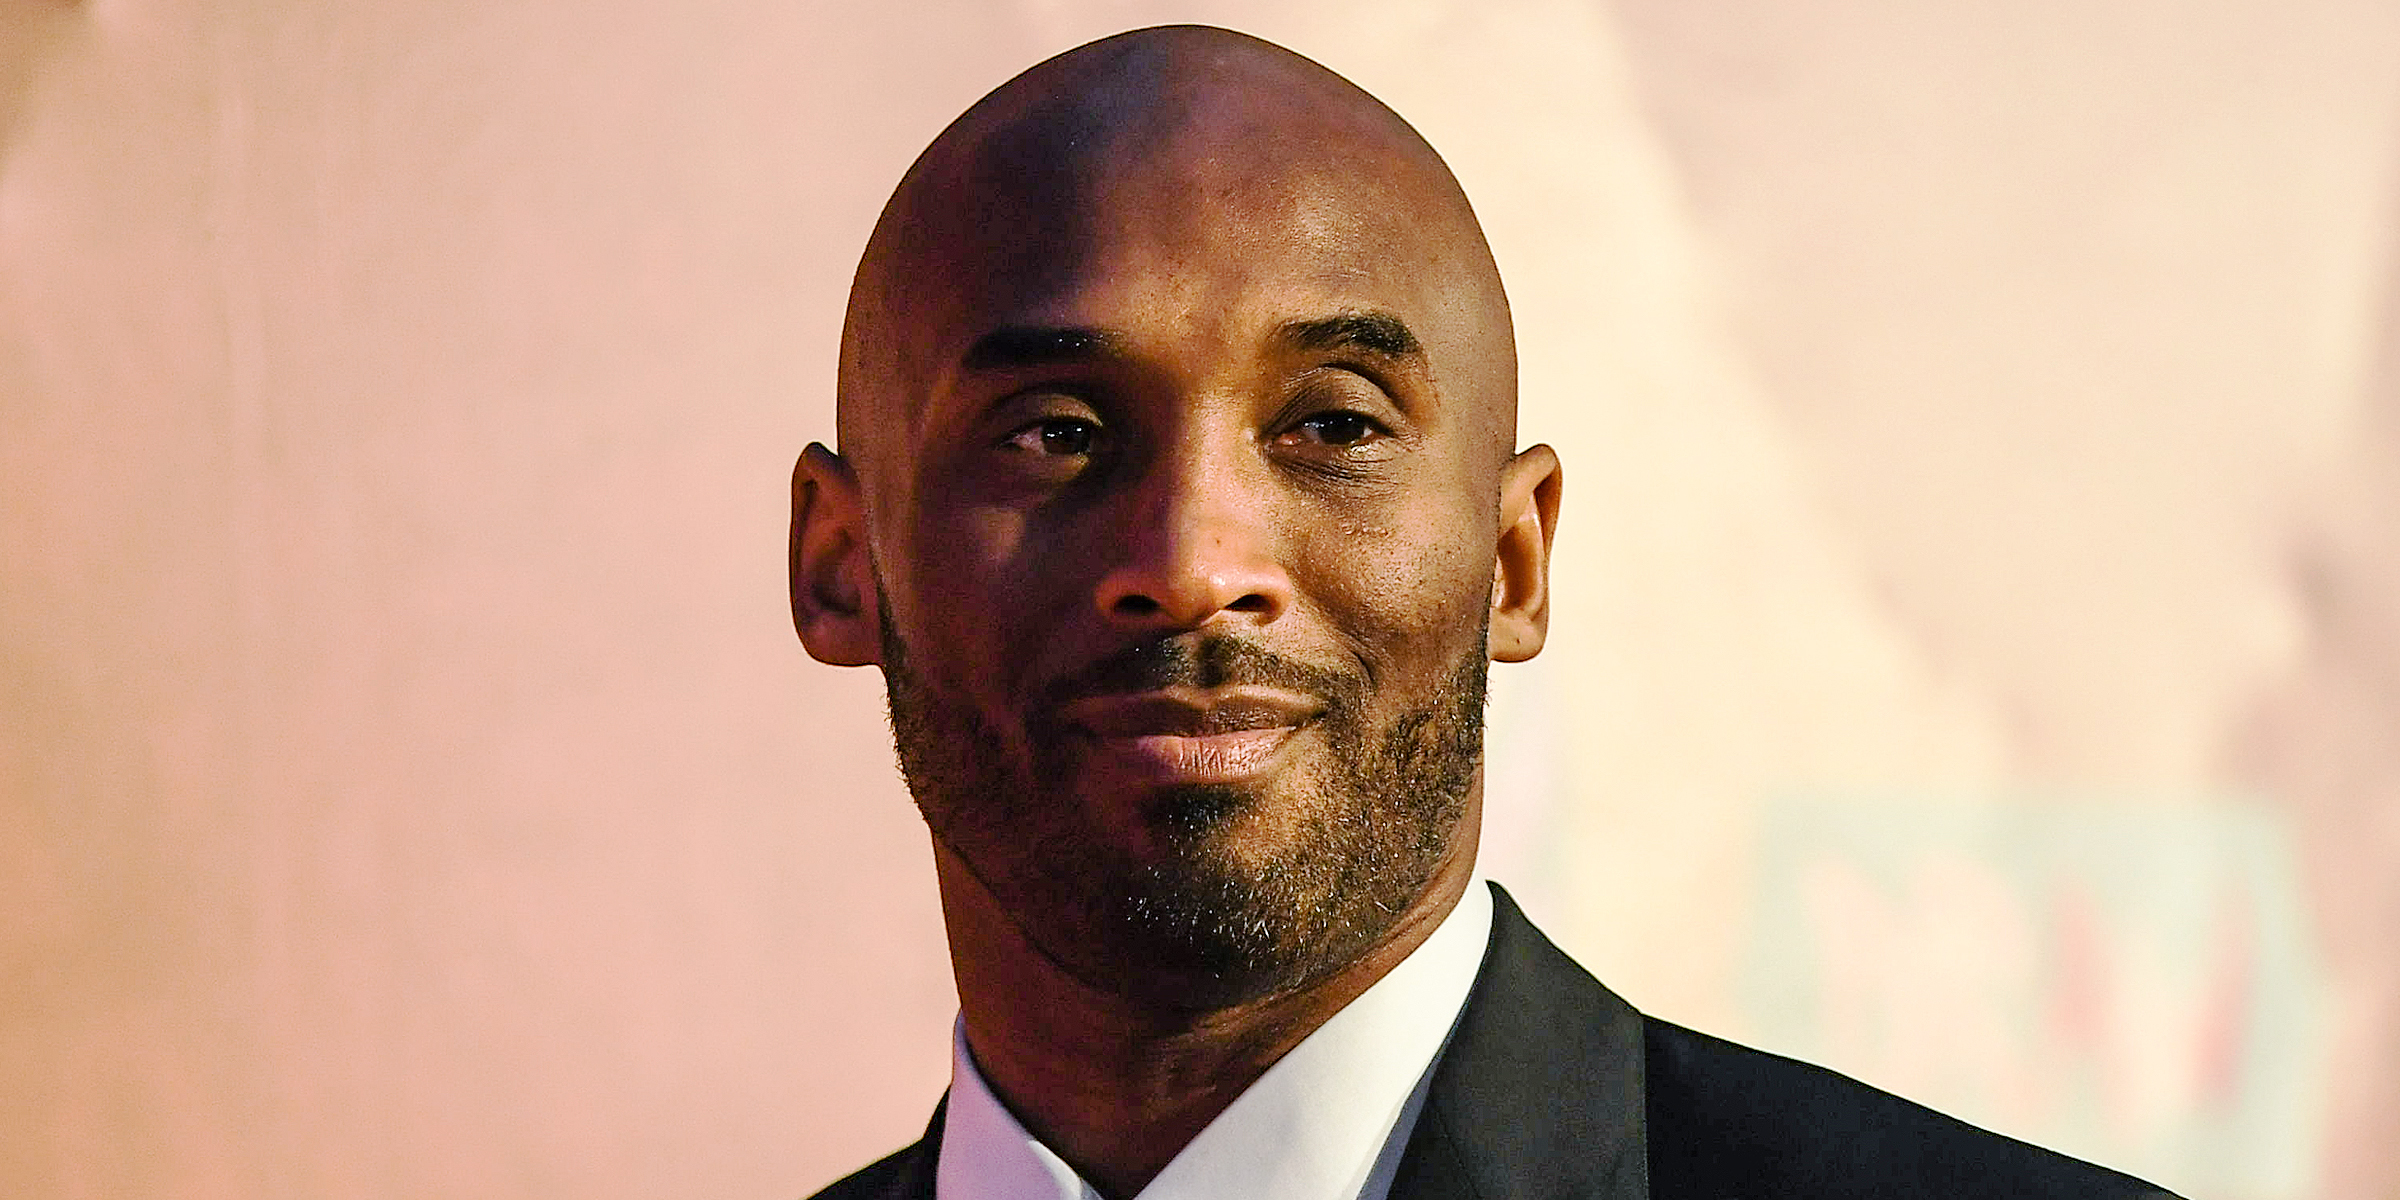 Kobe Bryant | Source: Getty Images